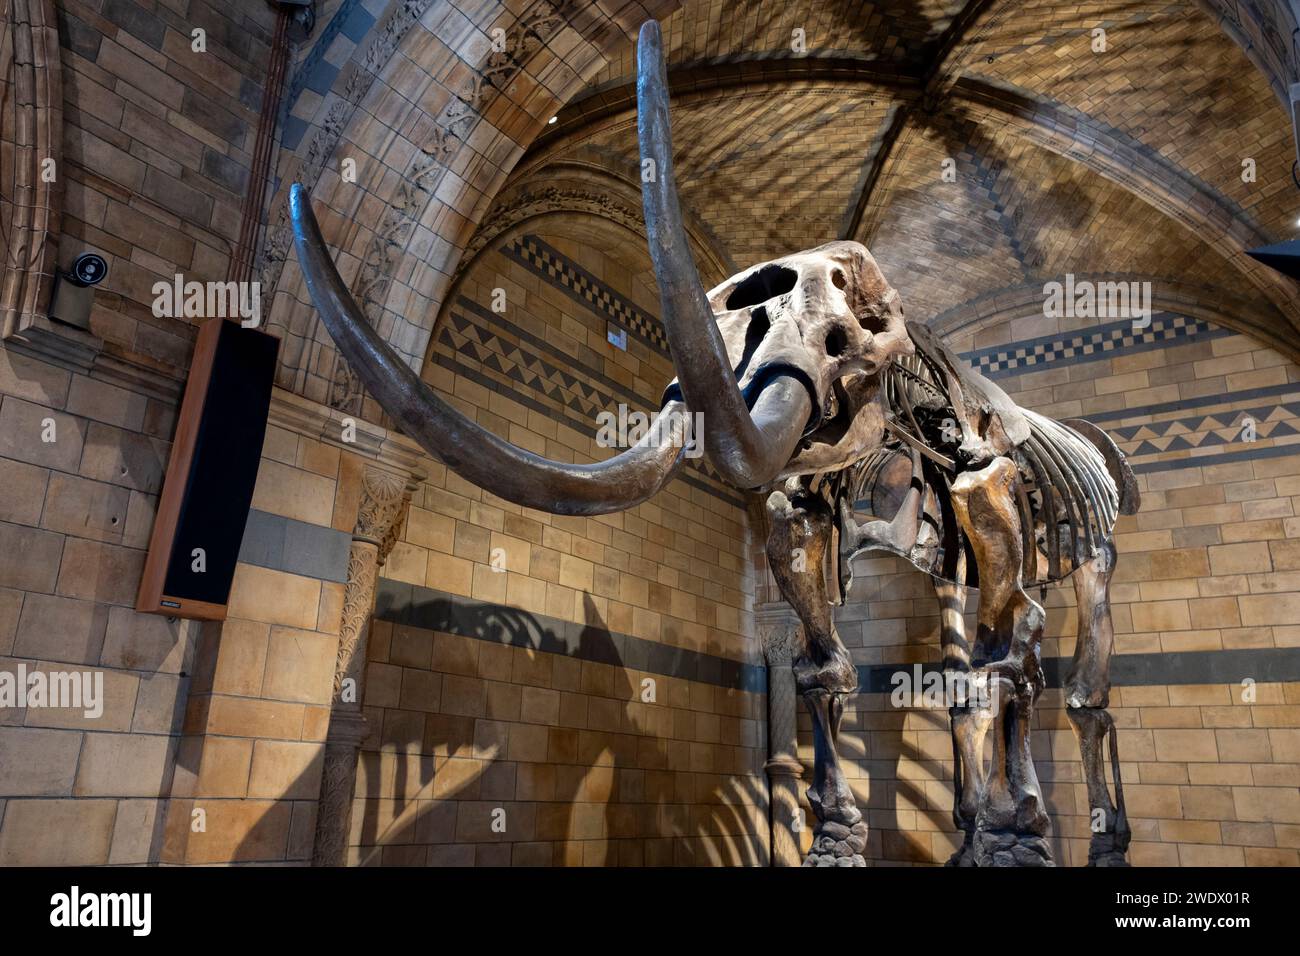 Fossilised skeleton of an American Mastodon, an Ice Age relative of the elephant at the Natural History Museum on 19th January 2024 in London, United Kingdom. The museum exhibits a vast range of specimens from various segments of natural history. The museum is home to life and earth science specimens comprising some 80 million items within five main collections: botany, entomology, mineralogy, paleontology and zoology. The museum is a centre of research specialising in taxonomy, identification and conservation. Stock Photo